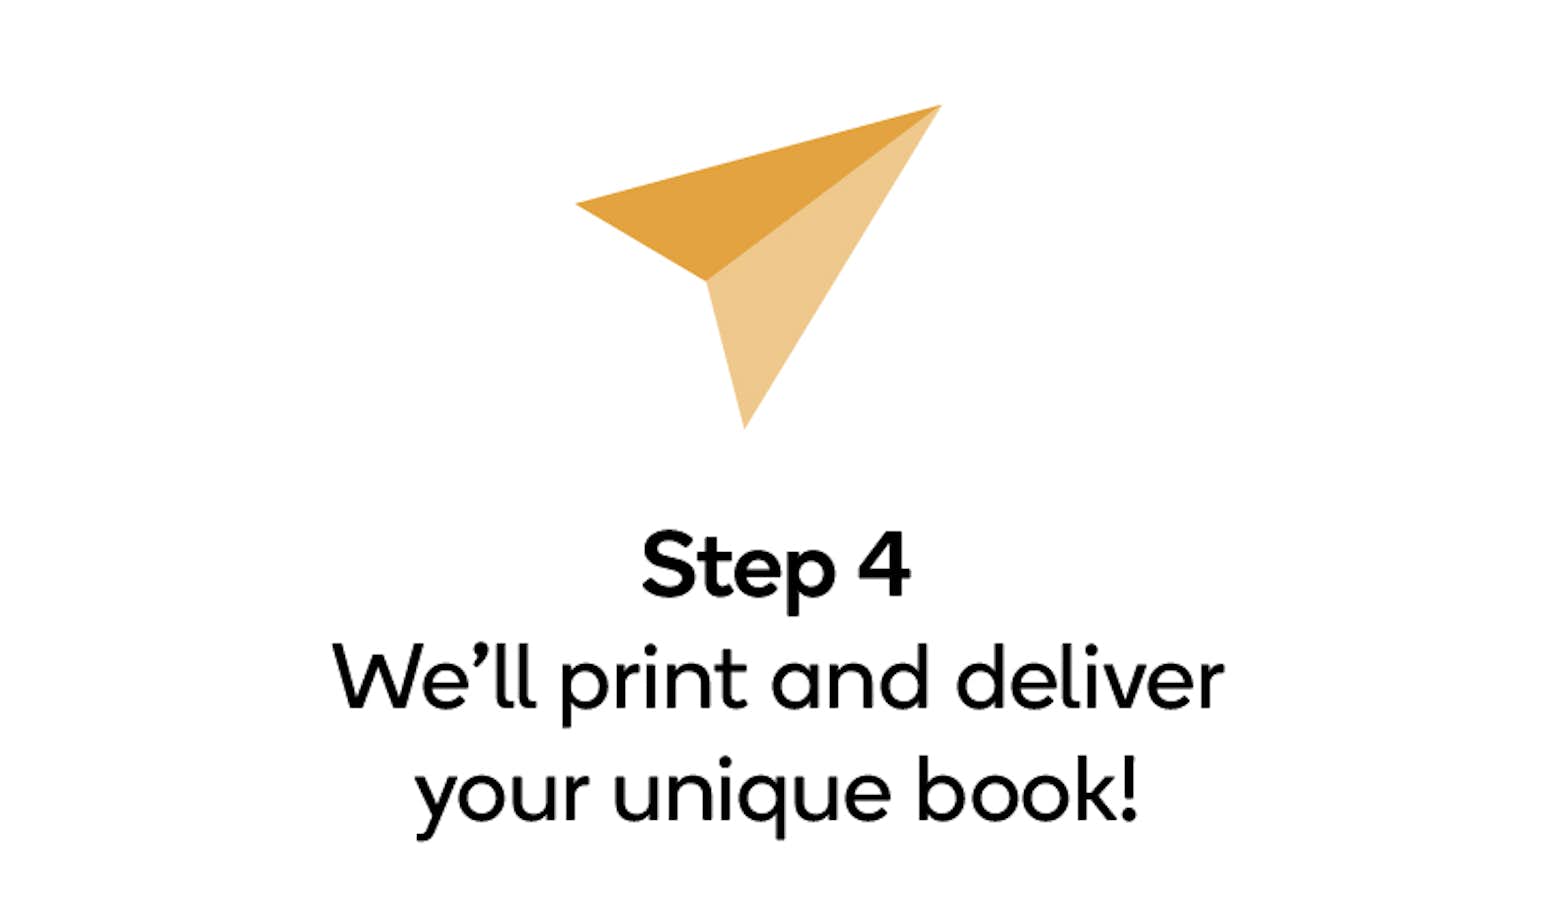 We'll print and deliver your unique book!